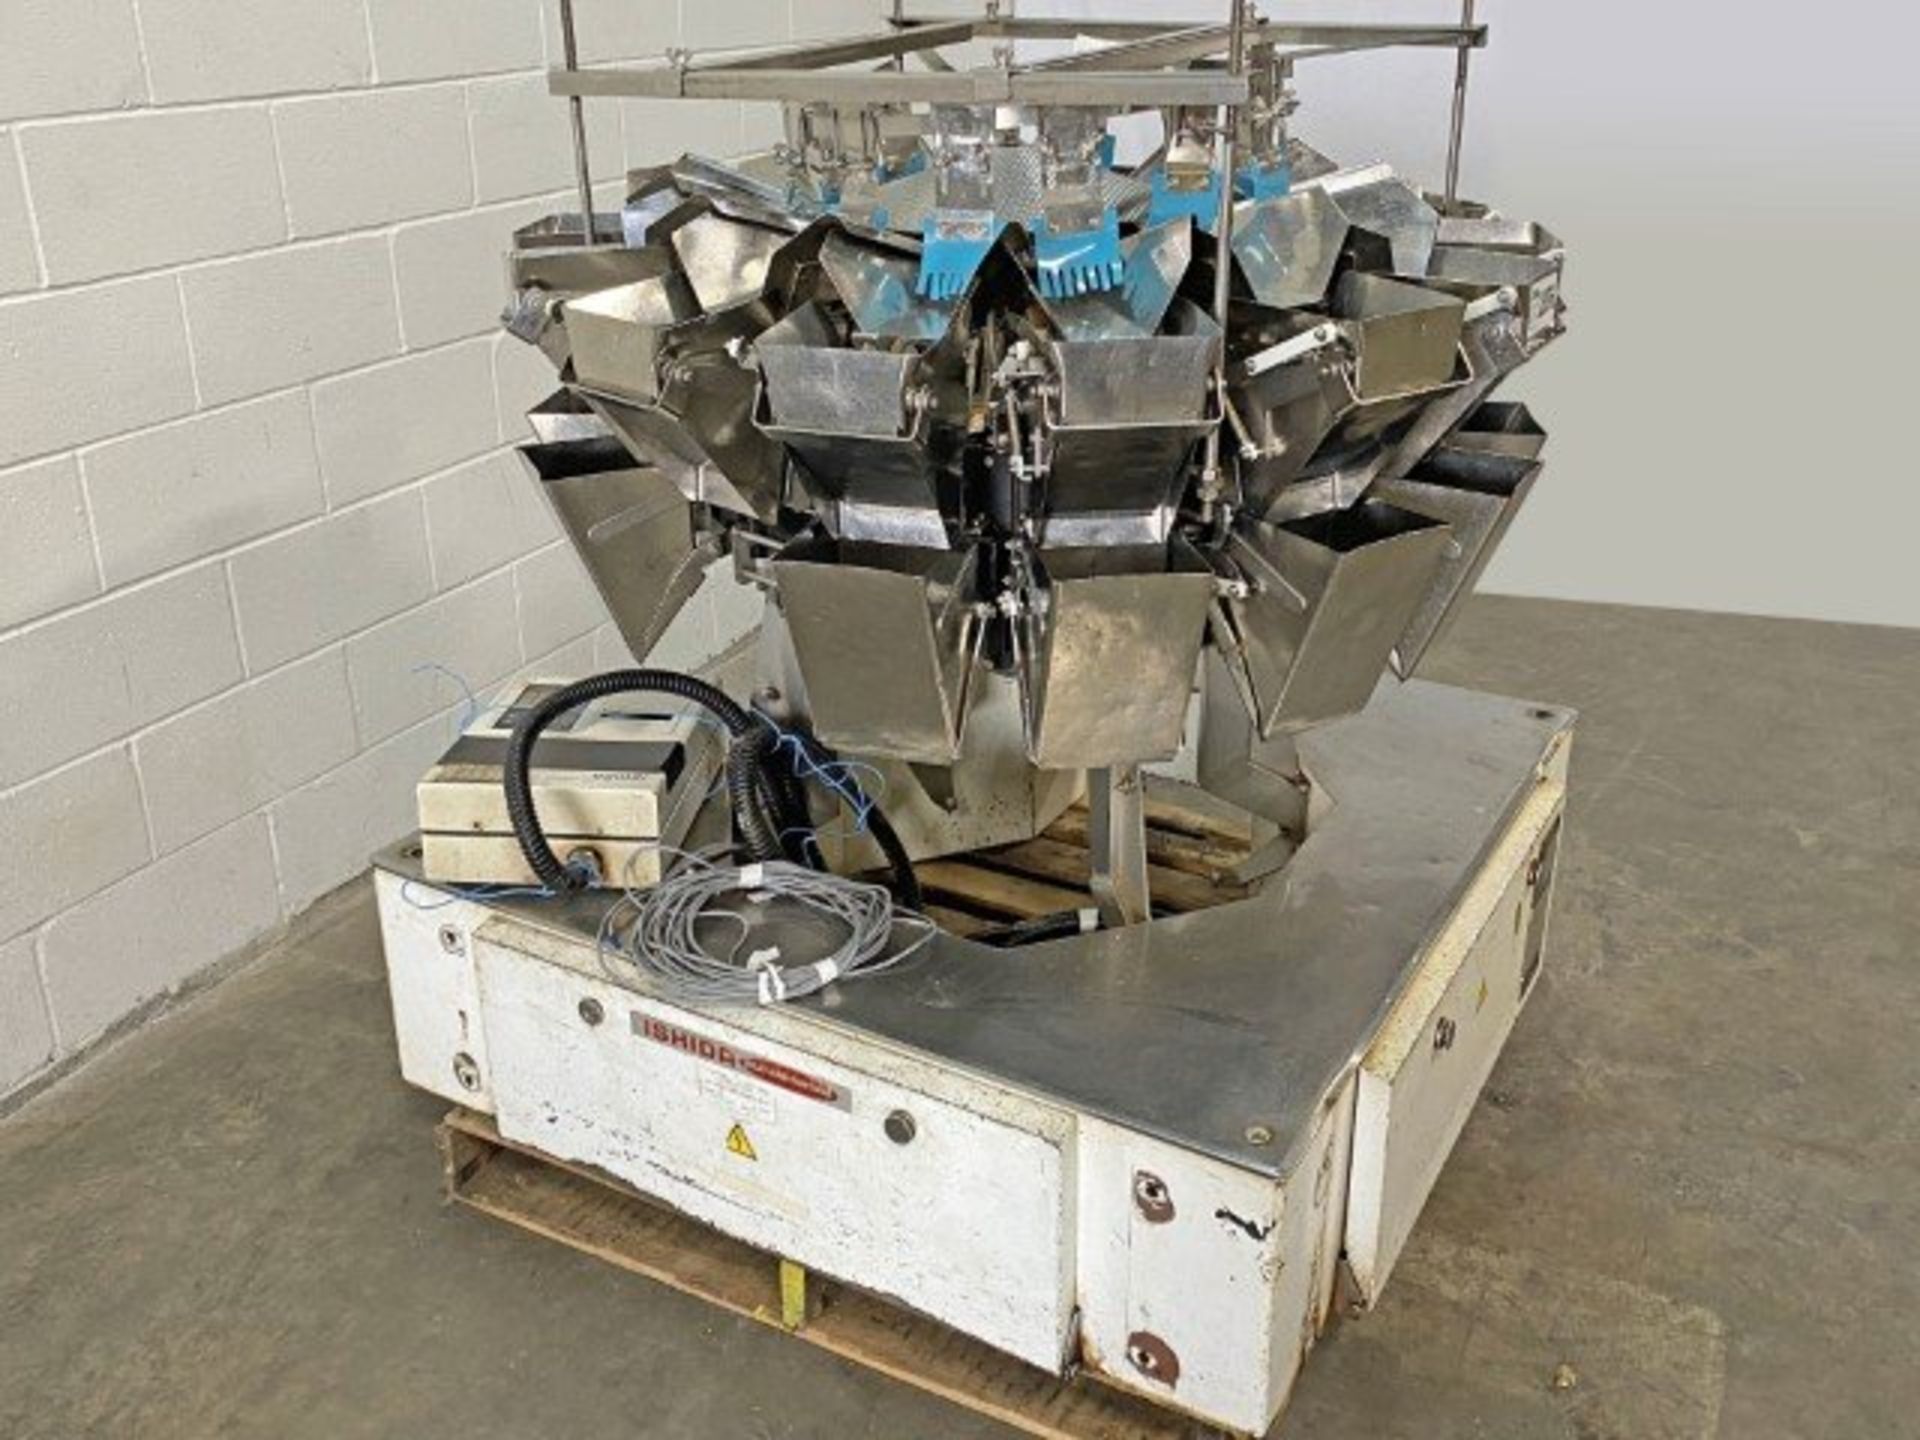 Ishida Multihead CCW Weigher - A 14-head Computer Combination Weigher ideal for candy, but handles a